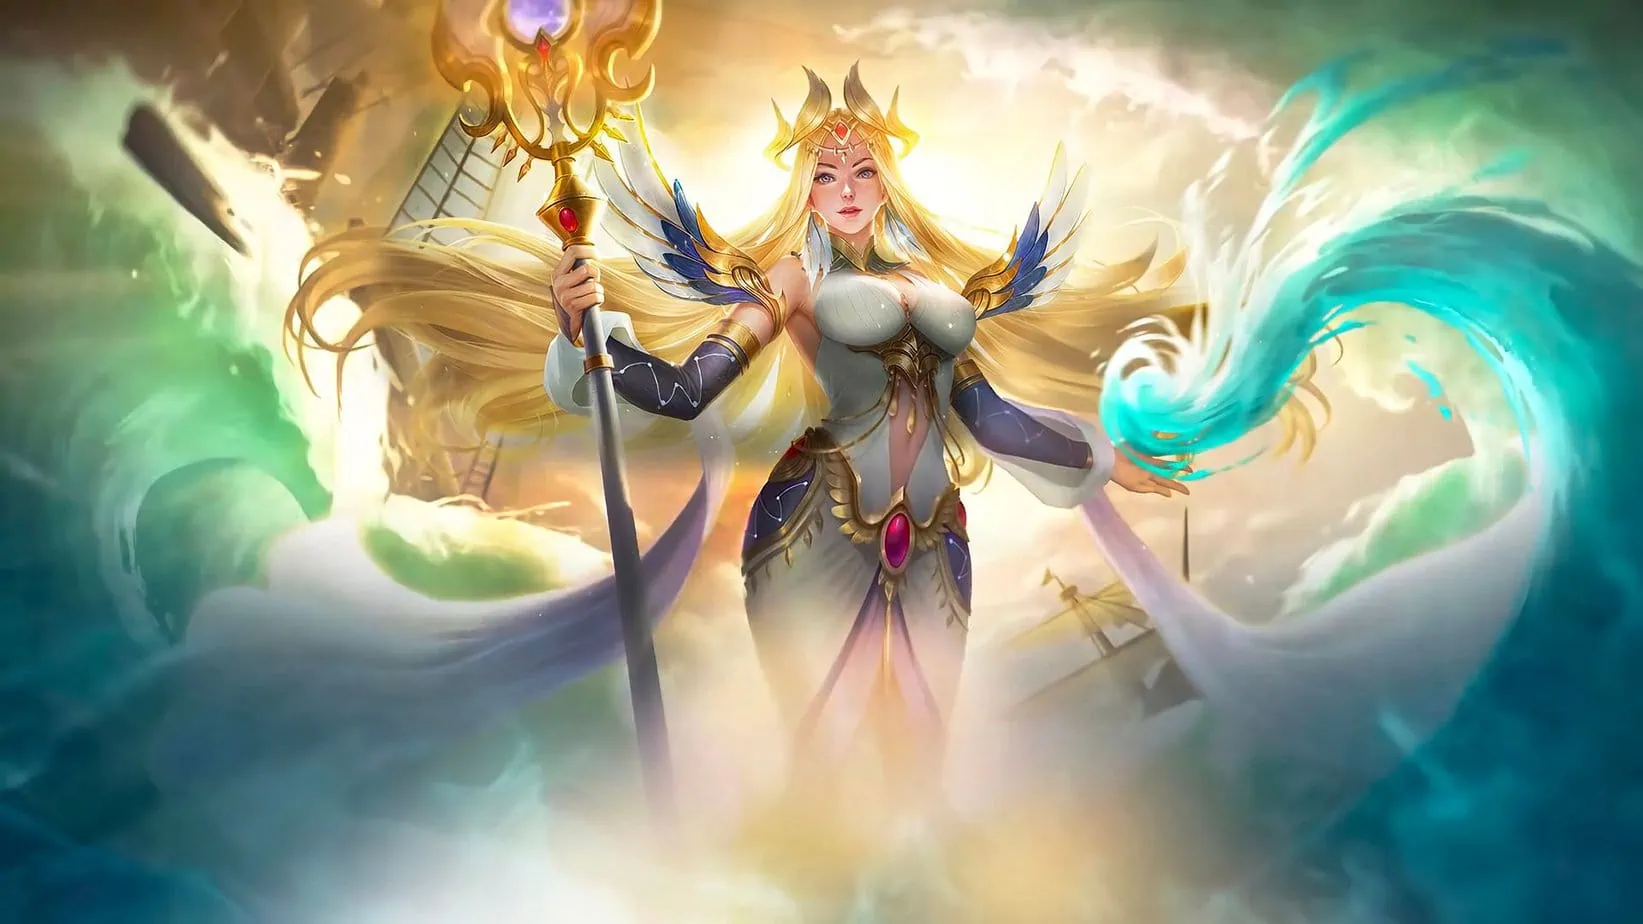 20+ Wallpaper Selena Mobile Legends (ML) Full HD for PC, Android & iOS